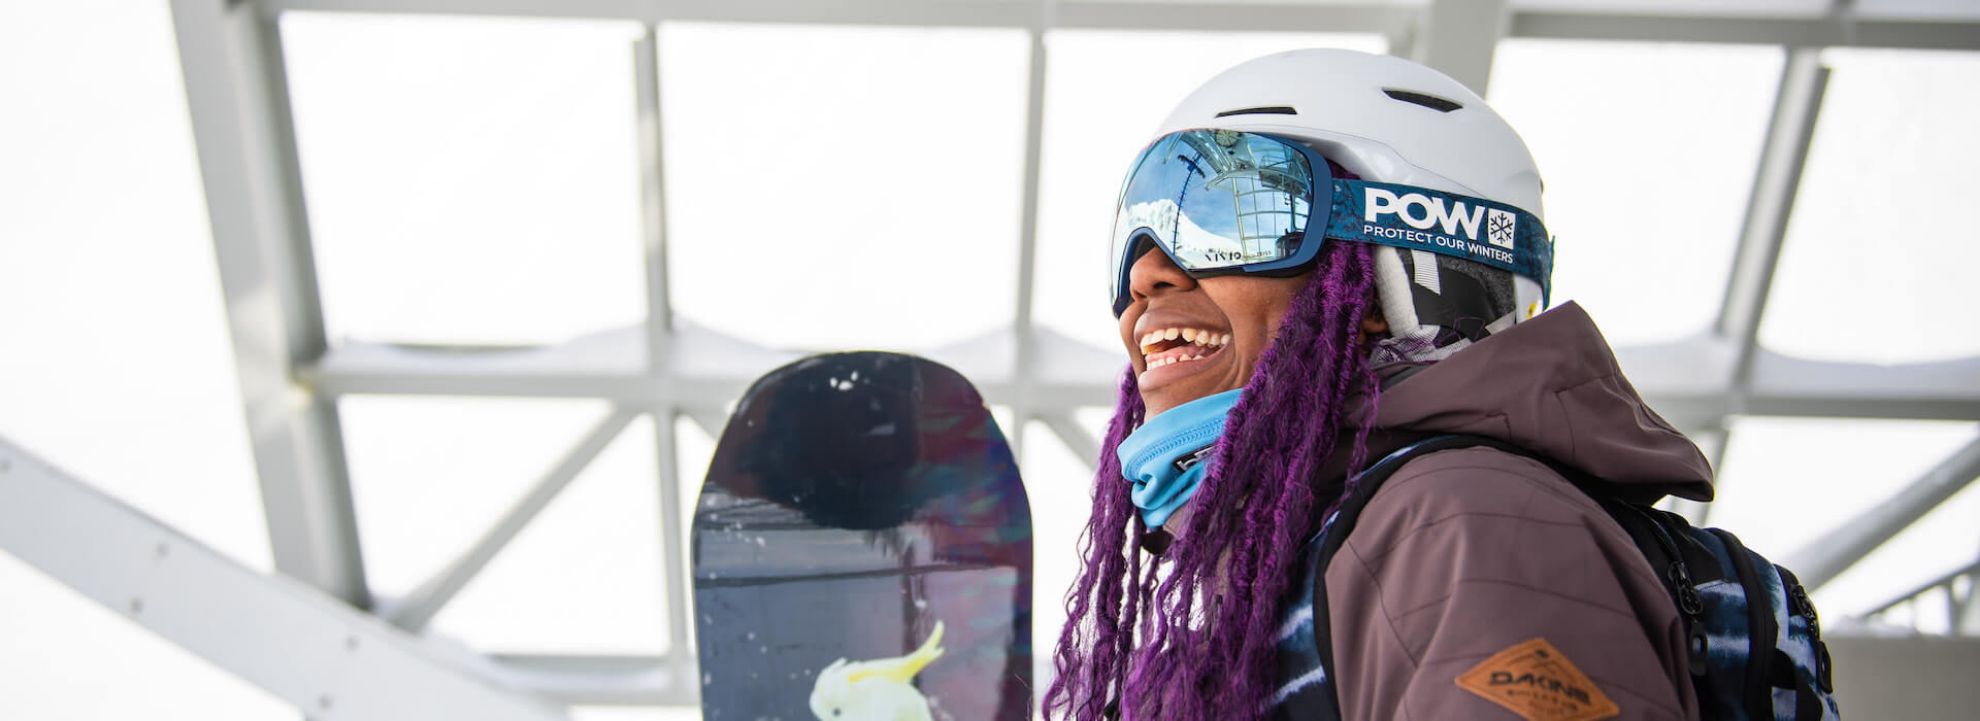 Woman Smiling while holding snowboard